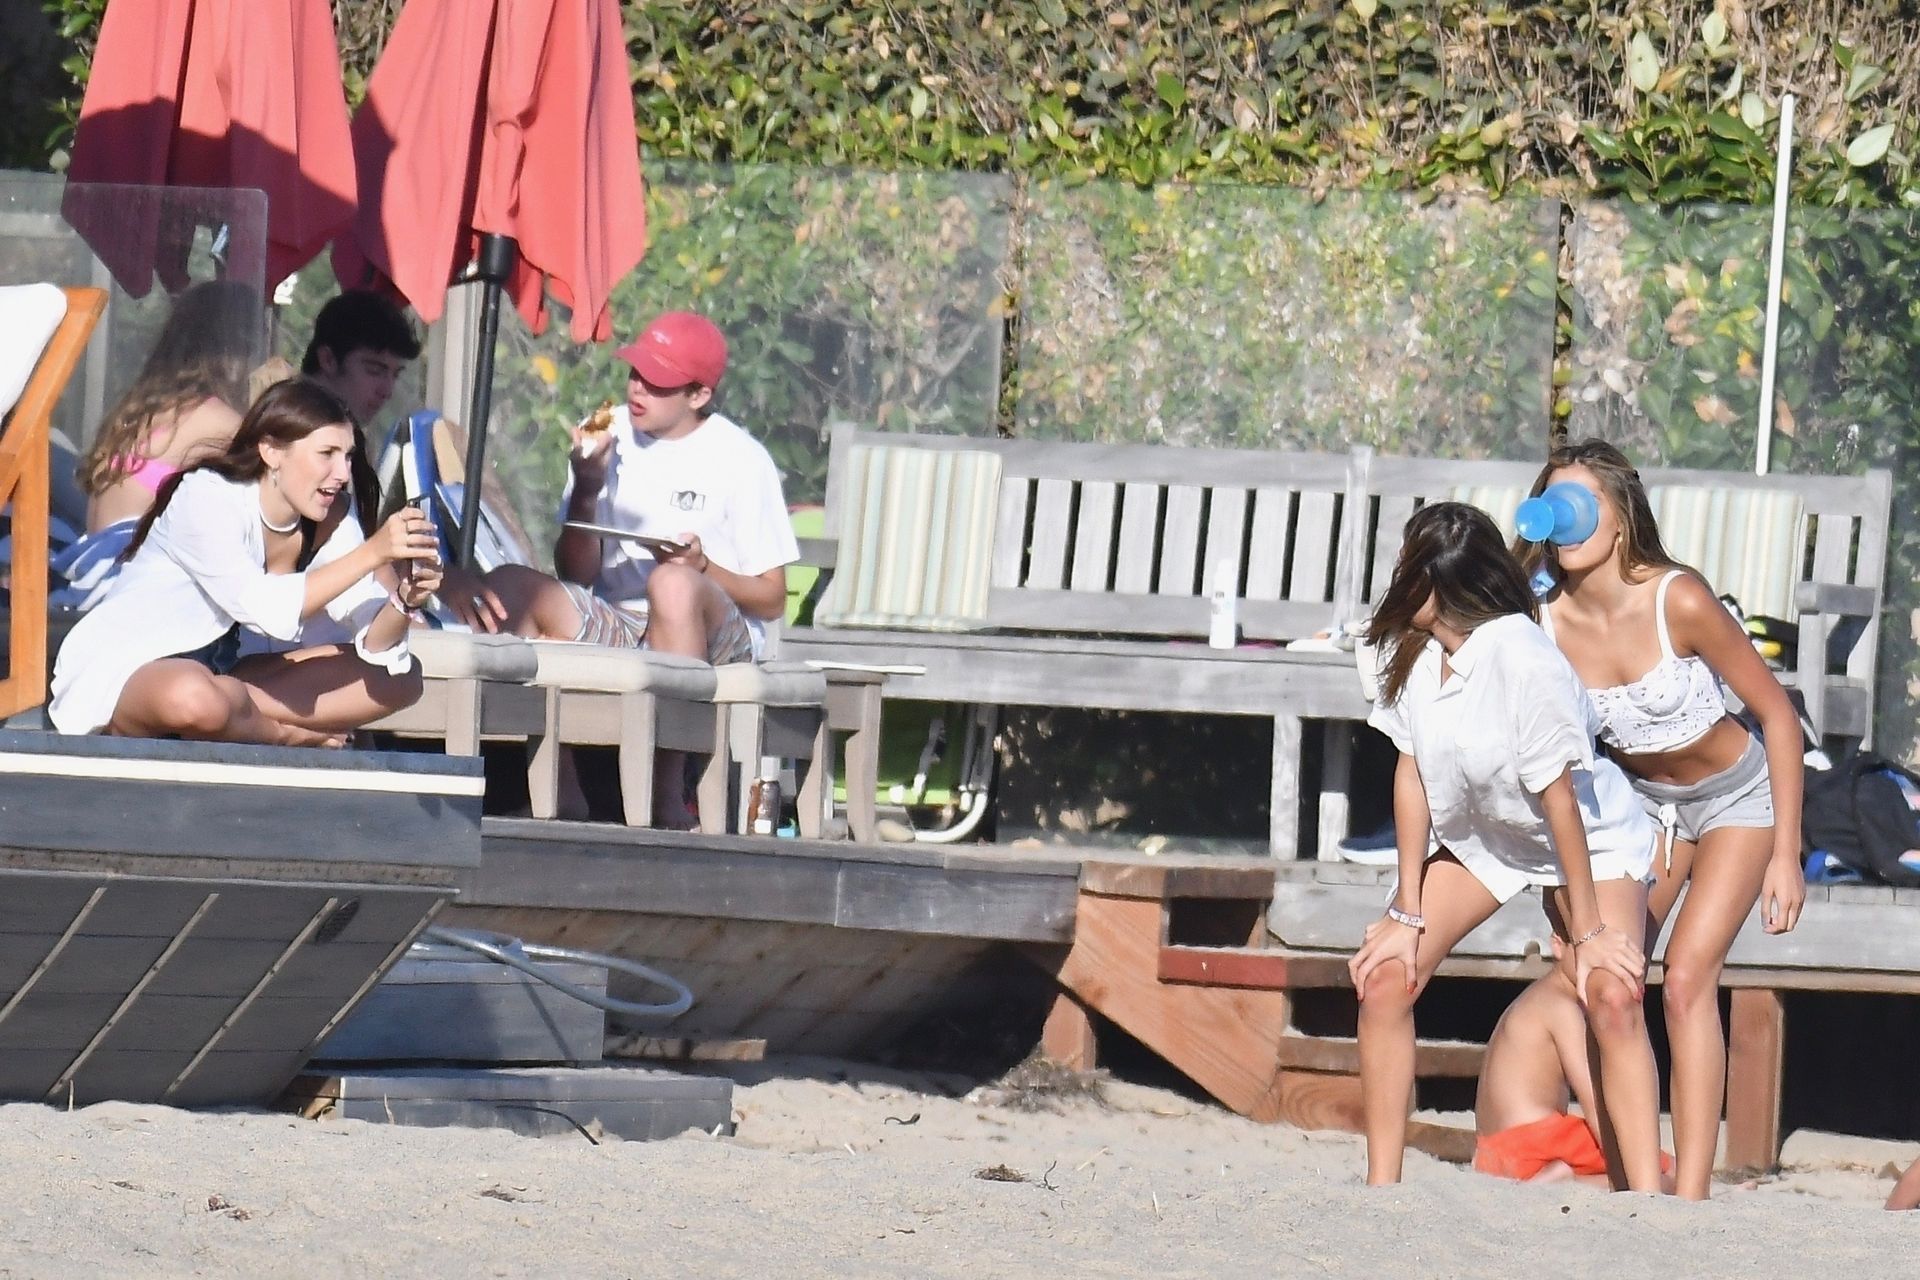 Sistine, Scarl
et, Sophia Stallone Have a Party at a Beach House in Malibu (158 Photos)